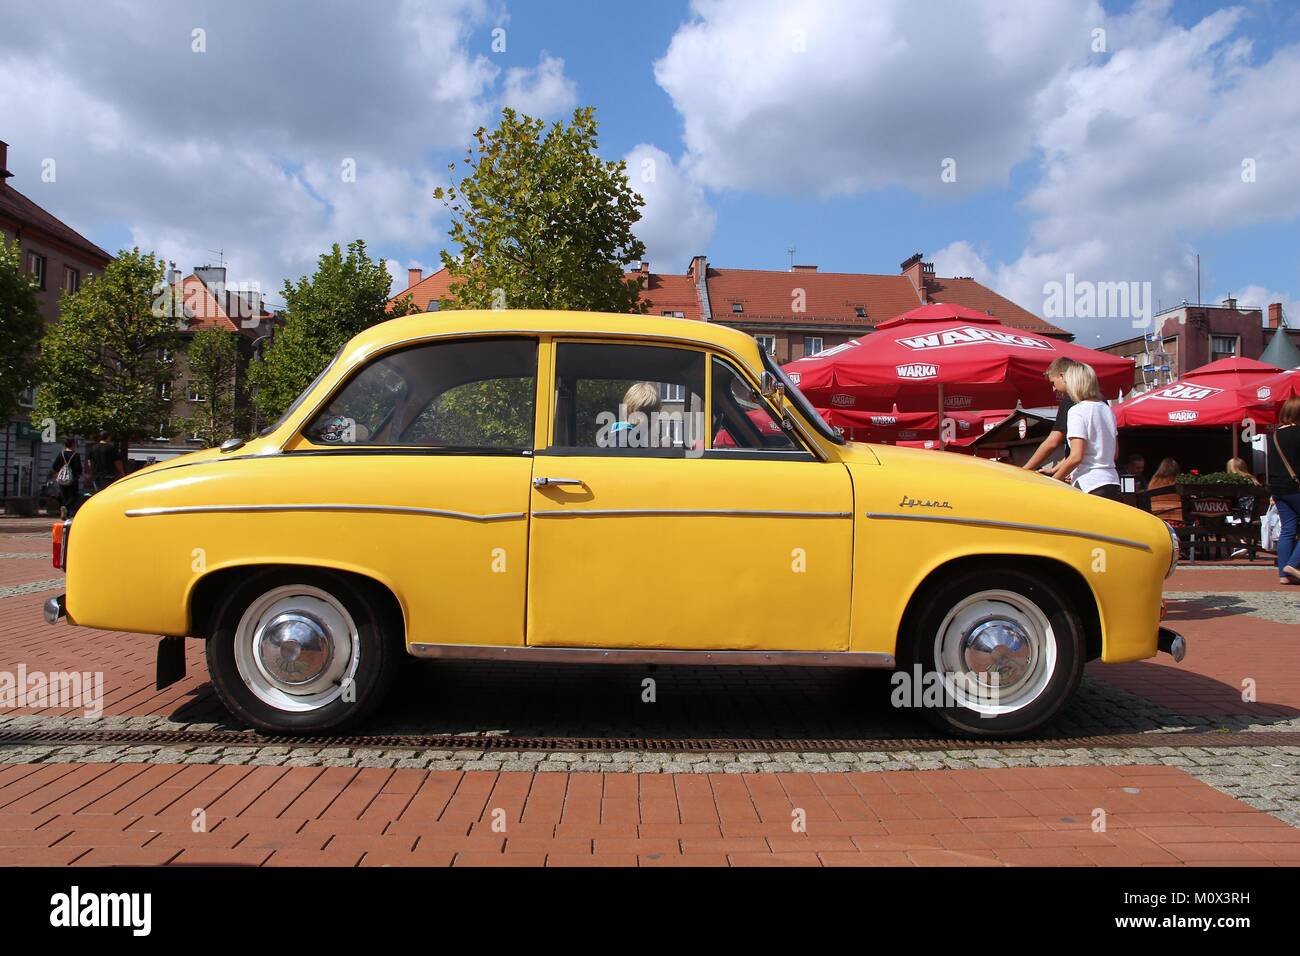 BYTOM, POLAND - SEPTEMBER 12, 2015: People walk by FSO Syrena 105 during 12th Historic Vehicle Rally in Bytom. The annual vehicle parade is one of mai Stock Photo